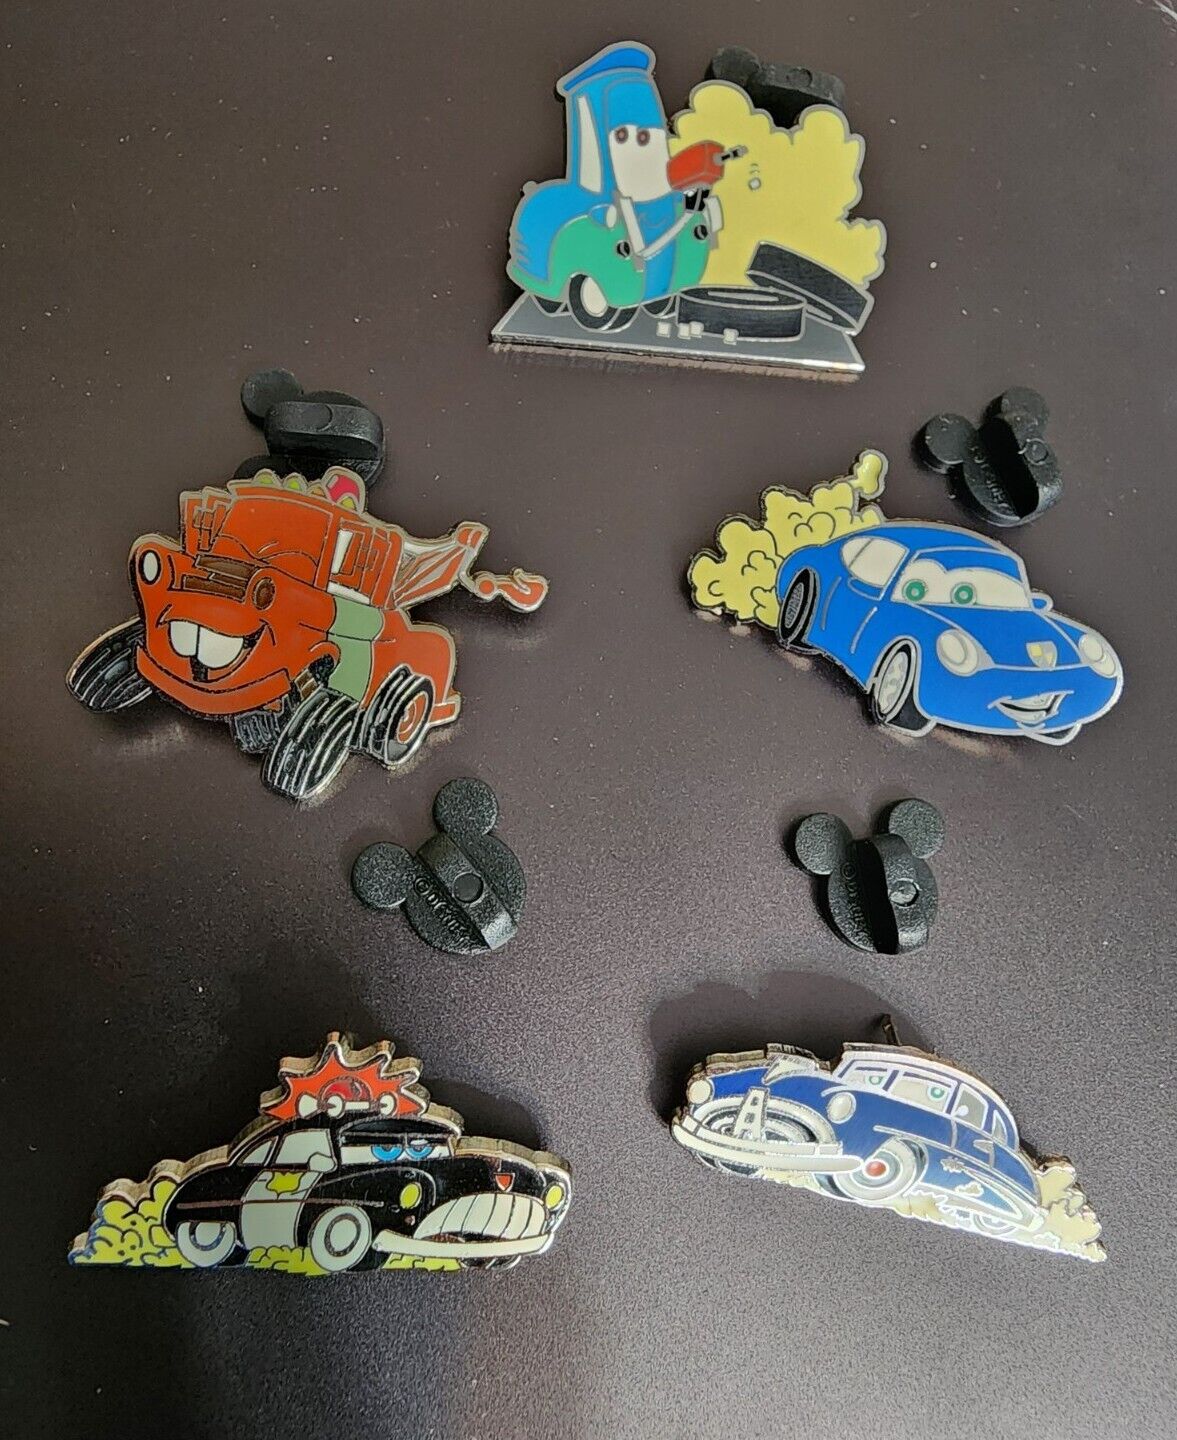 Disney pins Pixar Cars LE 800 5 of them Sheriff, Doc, Sally, Mater and Guido